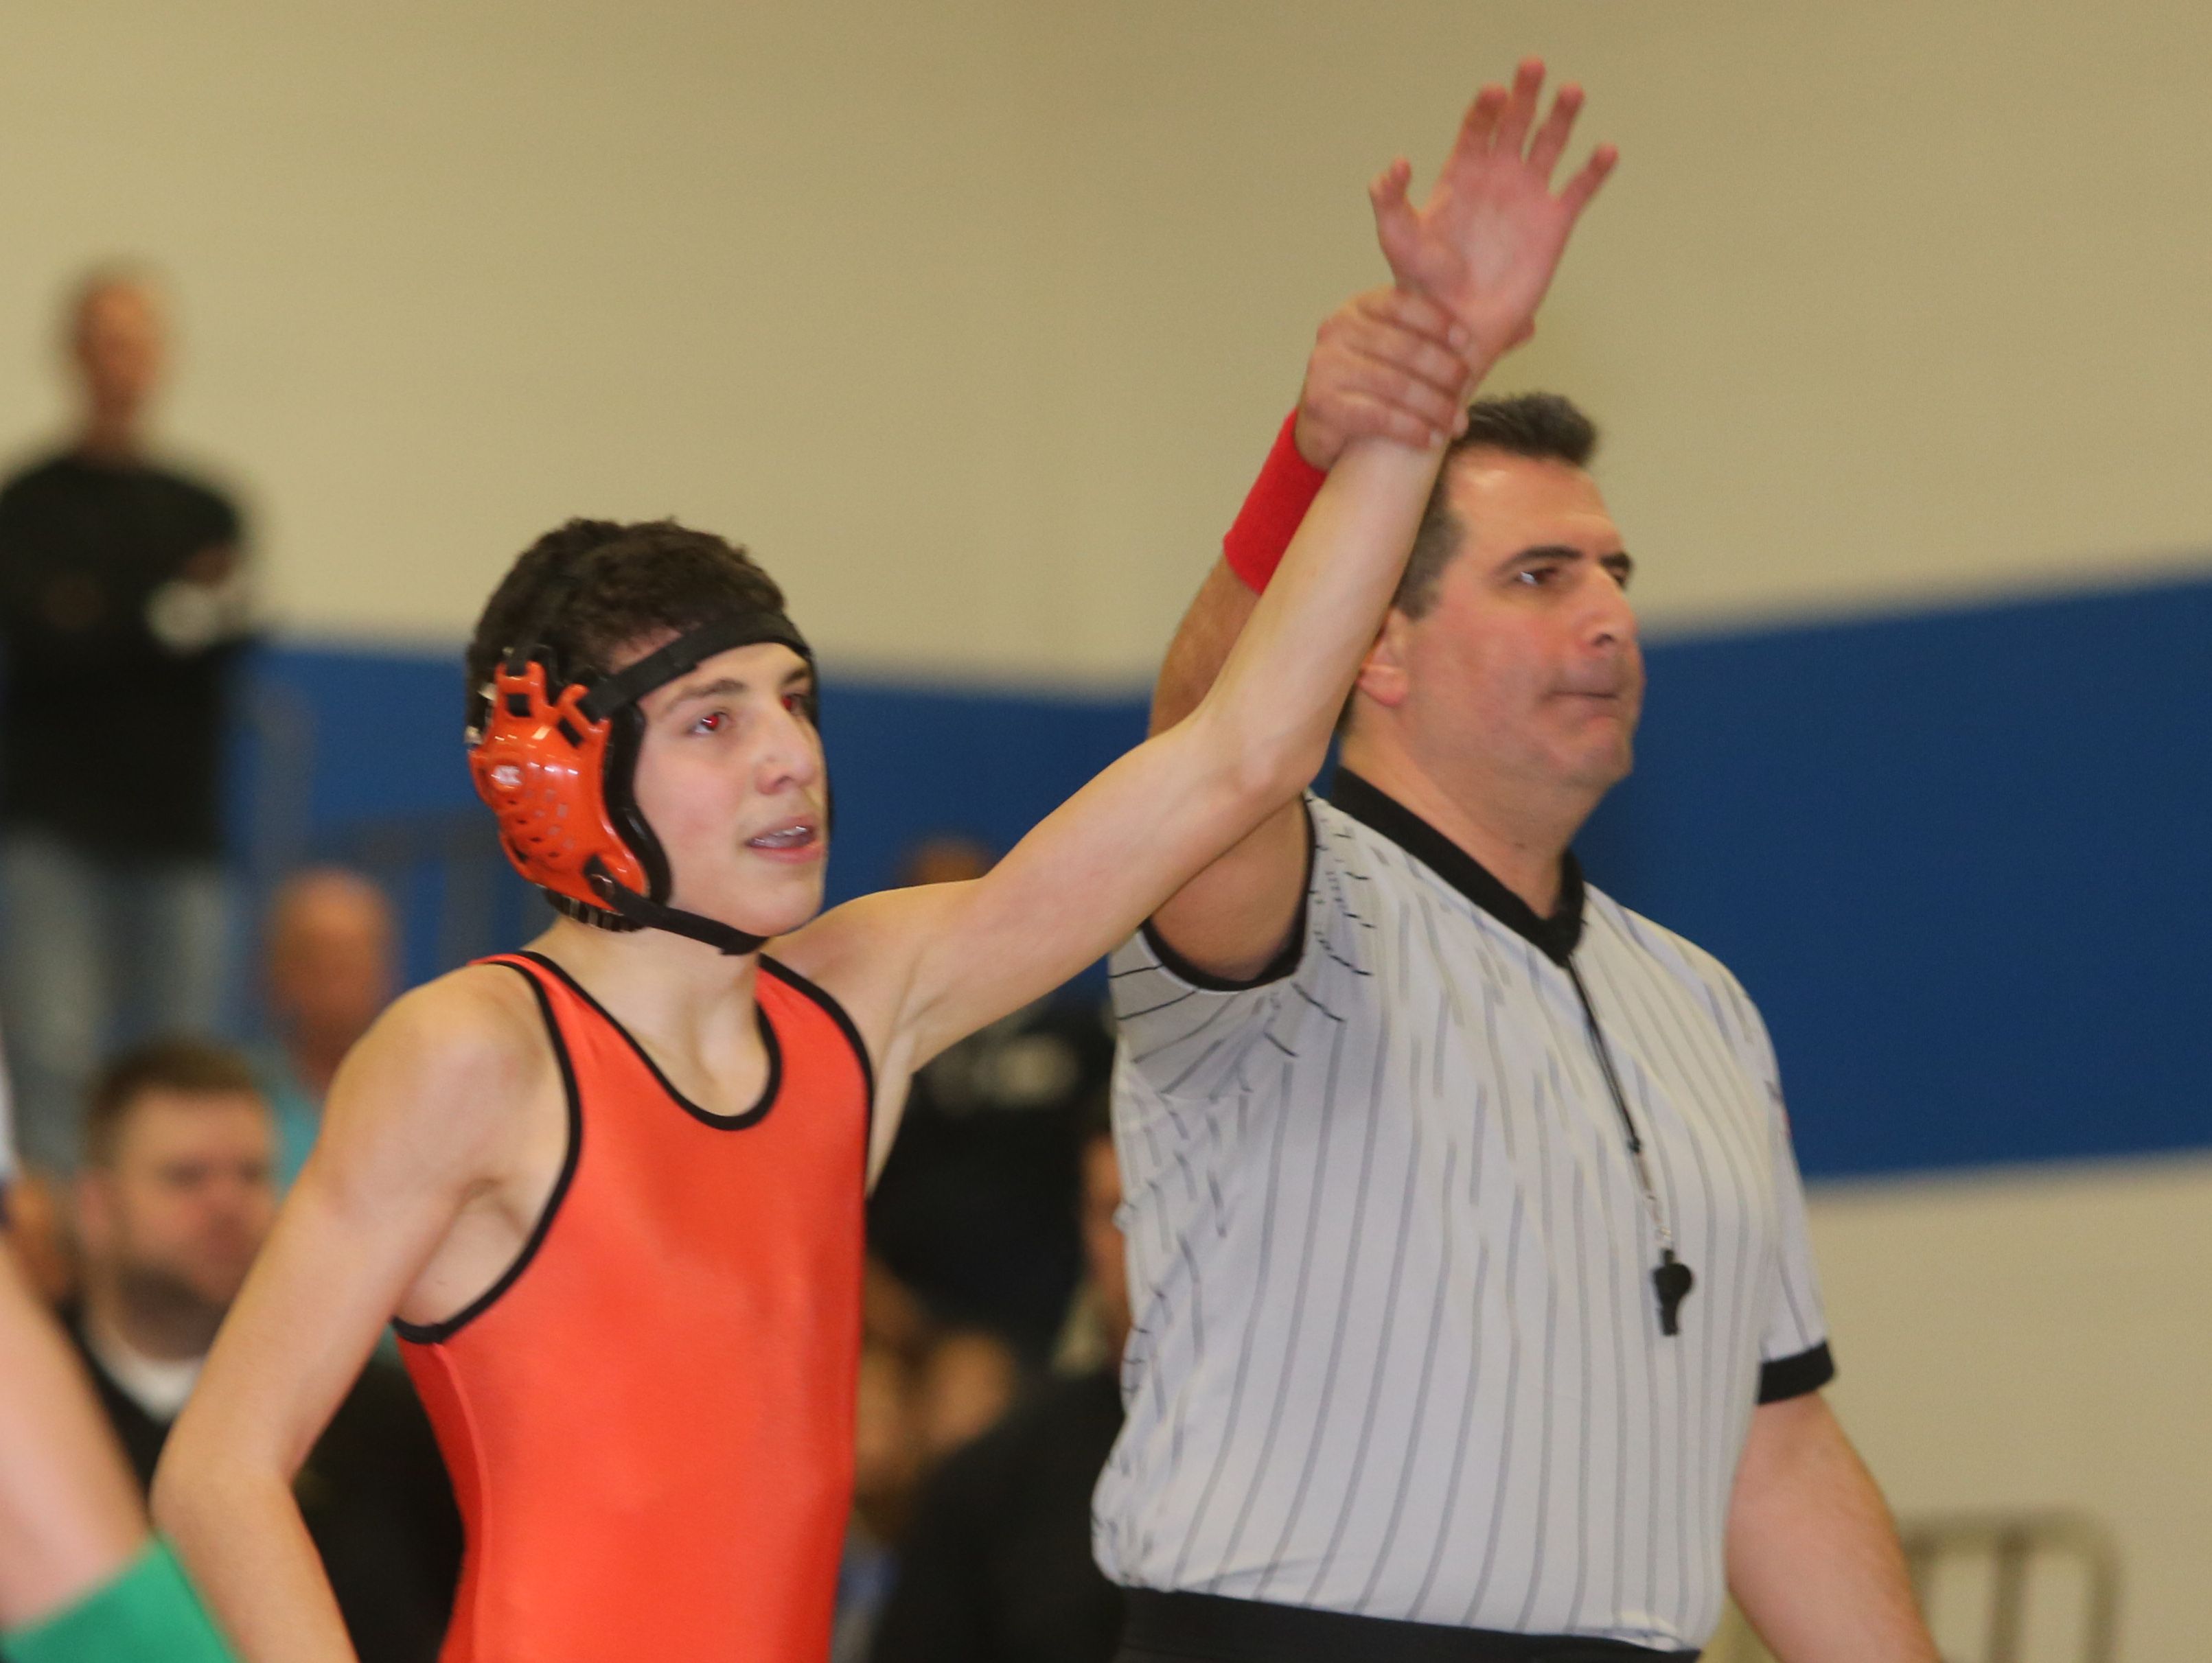 Pawling's Alex Santana defeated Nanuet's Chris DiModugno in the 99 pound weight class, during the Section 1 Division 2 wrestling championships at Edgemont High School in Scarsdale, Feb. 11, 2017.